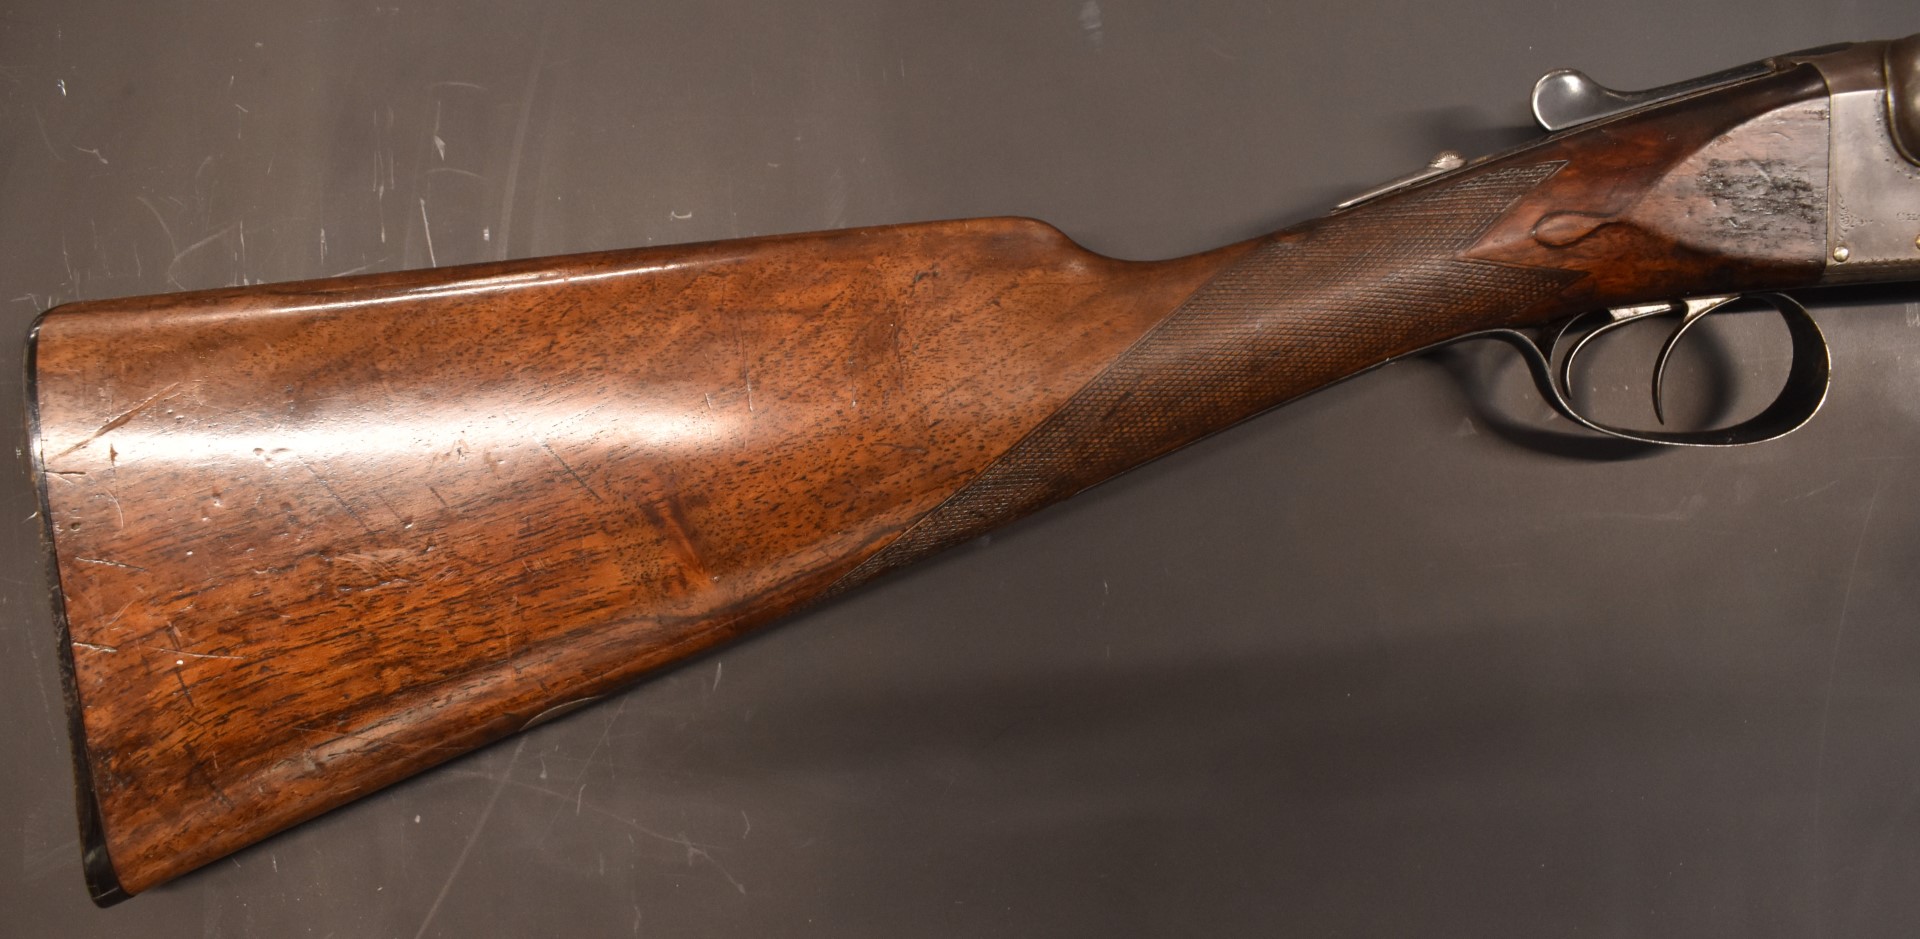 Charles Rosson & Son 12 bore side by side ejector shotgun with named lock, border engraved lock, - Image 4 of 11